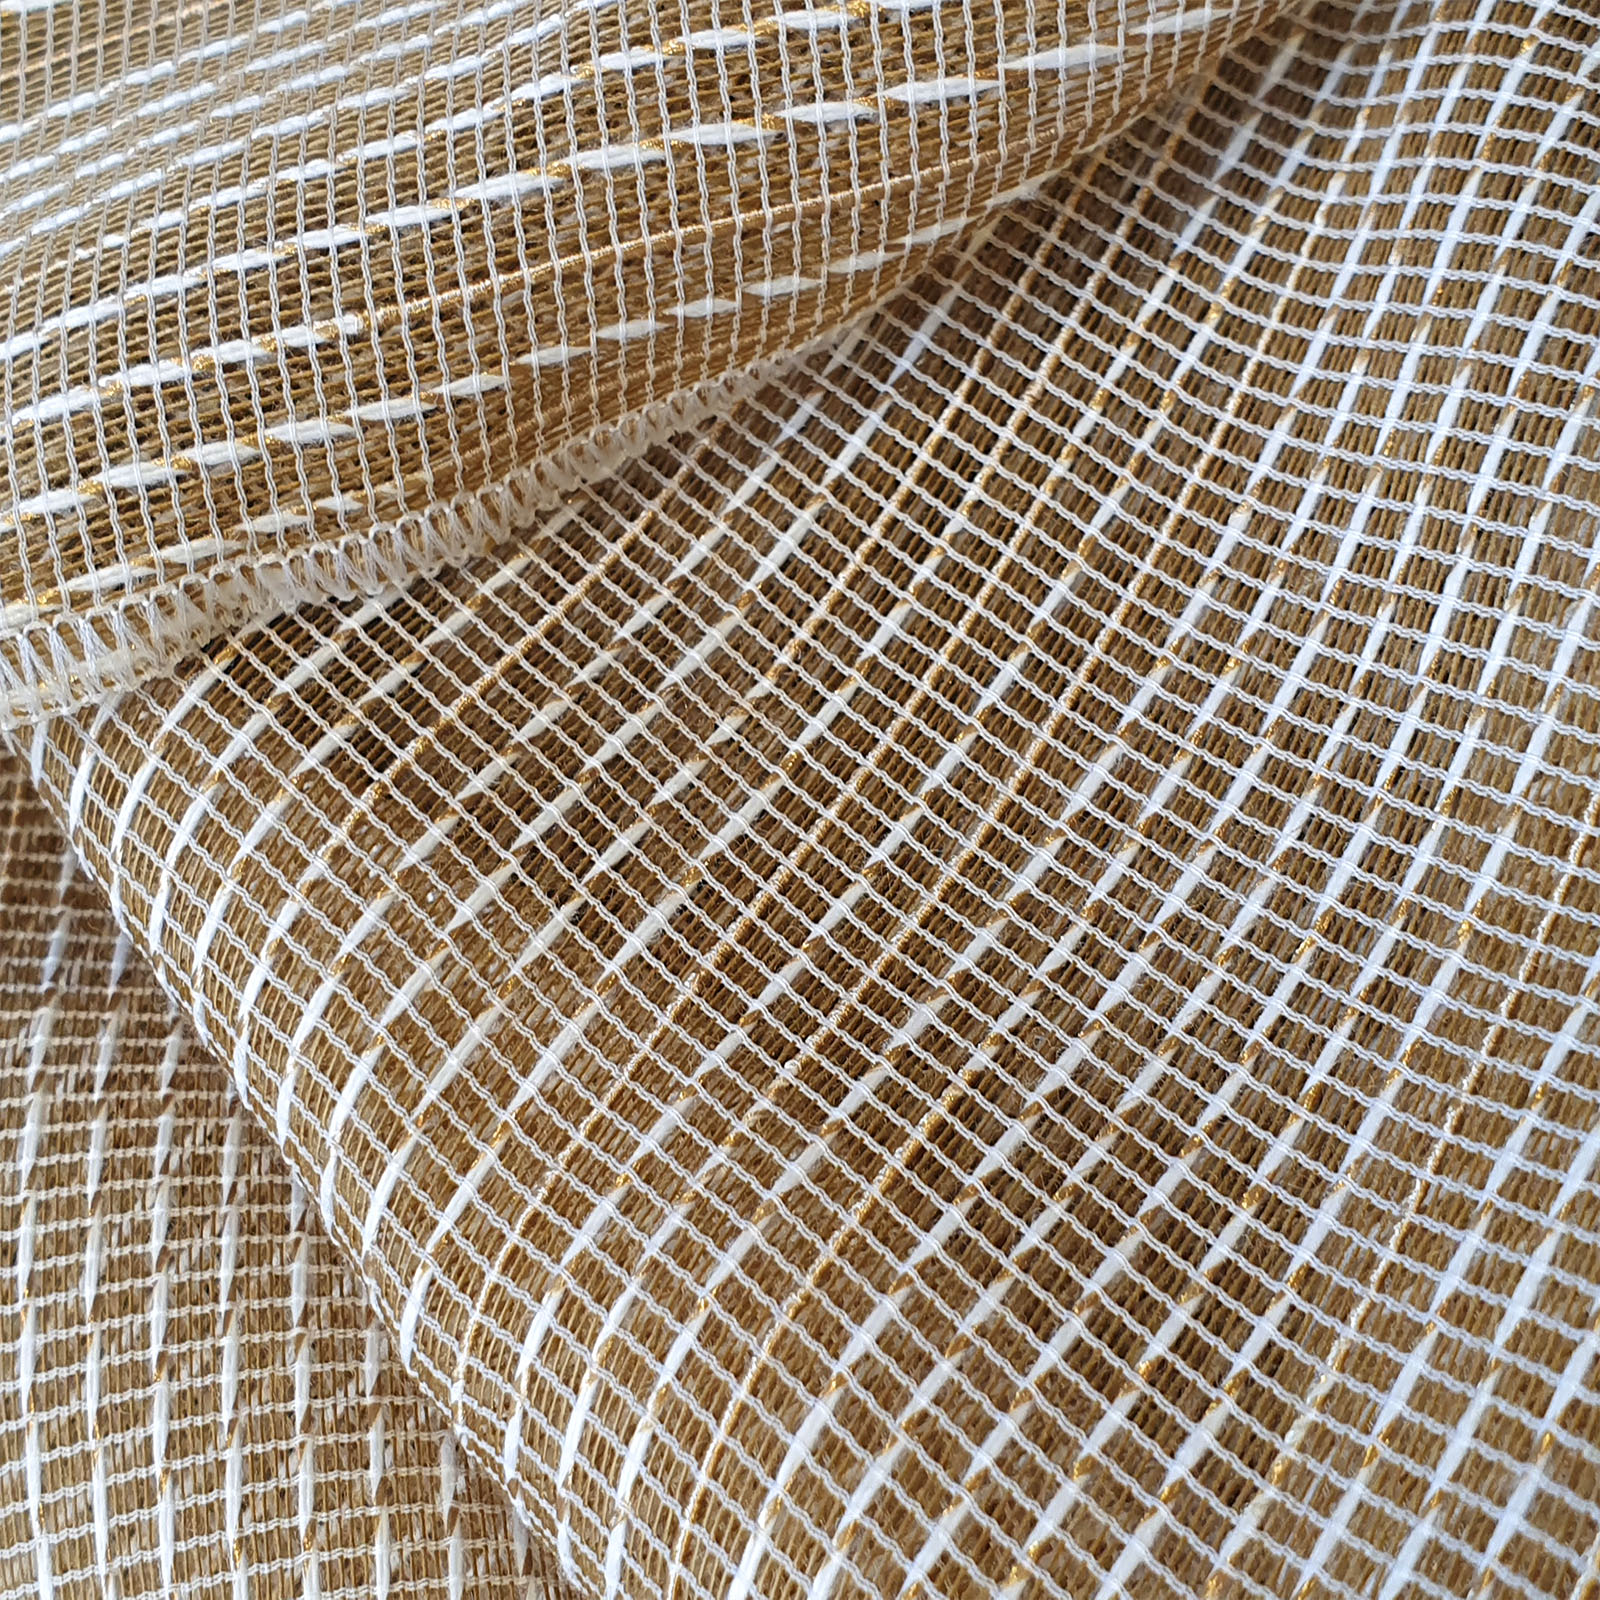 EG0219 WHIDE 320CM. 100%PL<br /> 100% Made in Italy fabric. Style modern and trendy with big drawings, plain, jacquard structures, plain color and Tone on tone decorations.

 Treatments: antibacterial and soft standard. Type of workings: standard. 